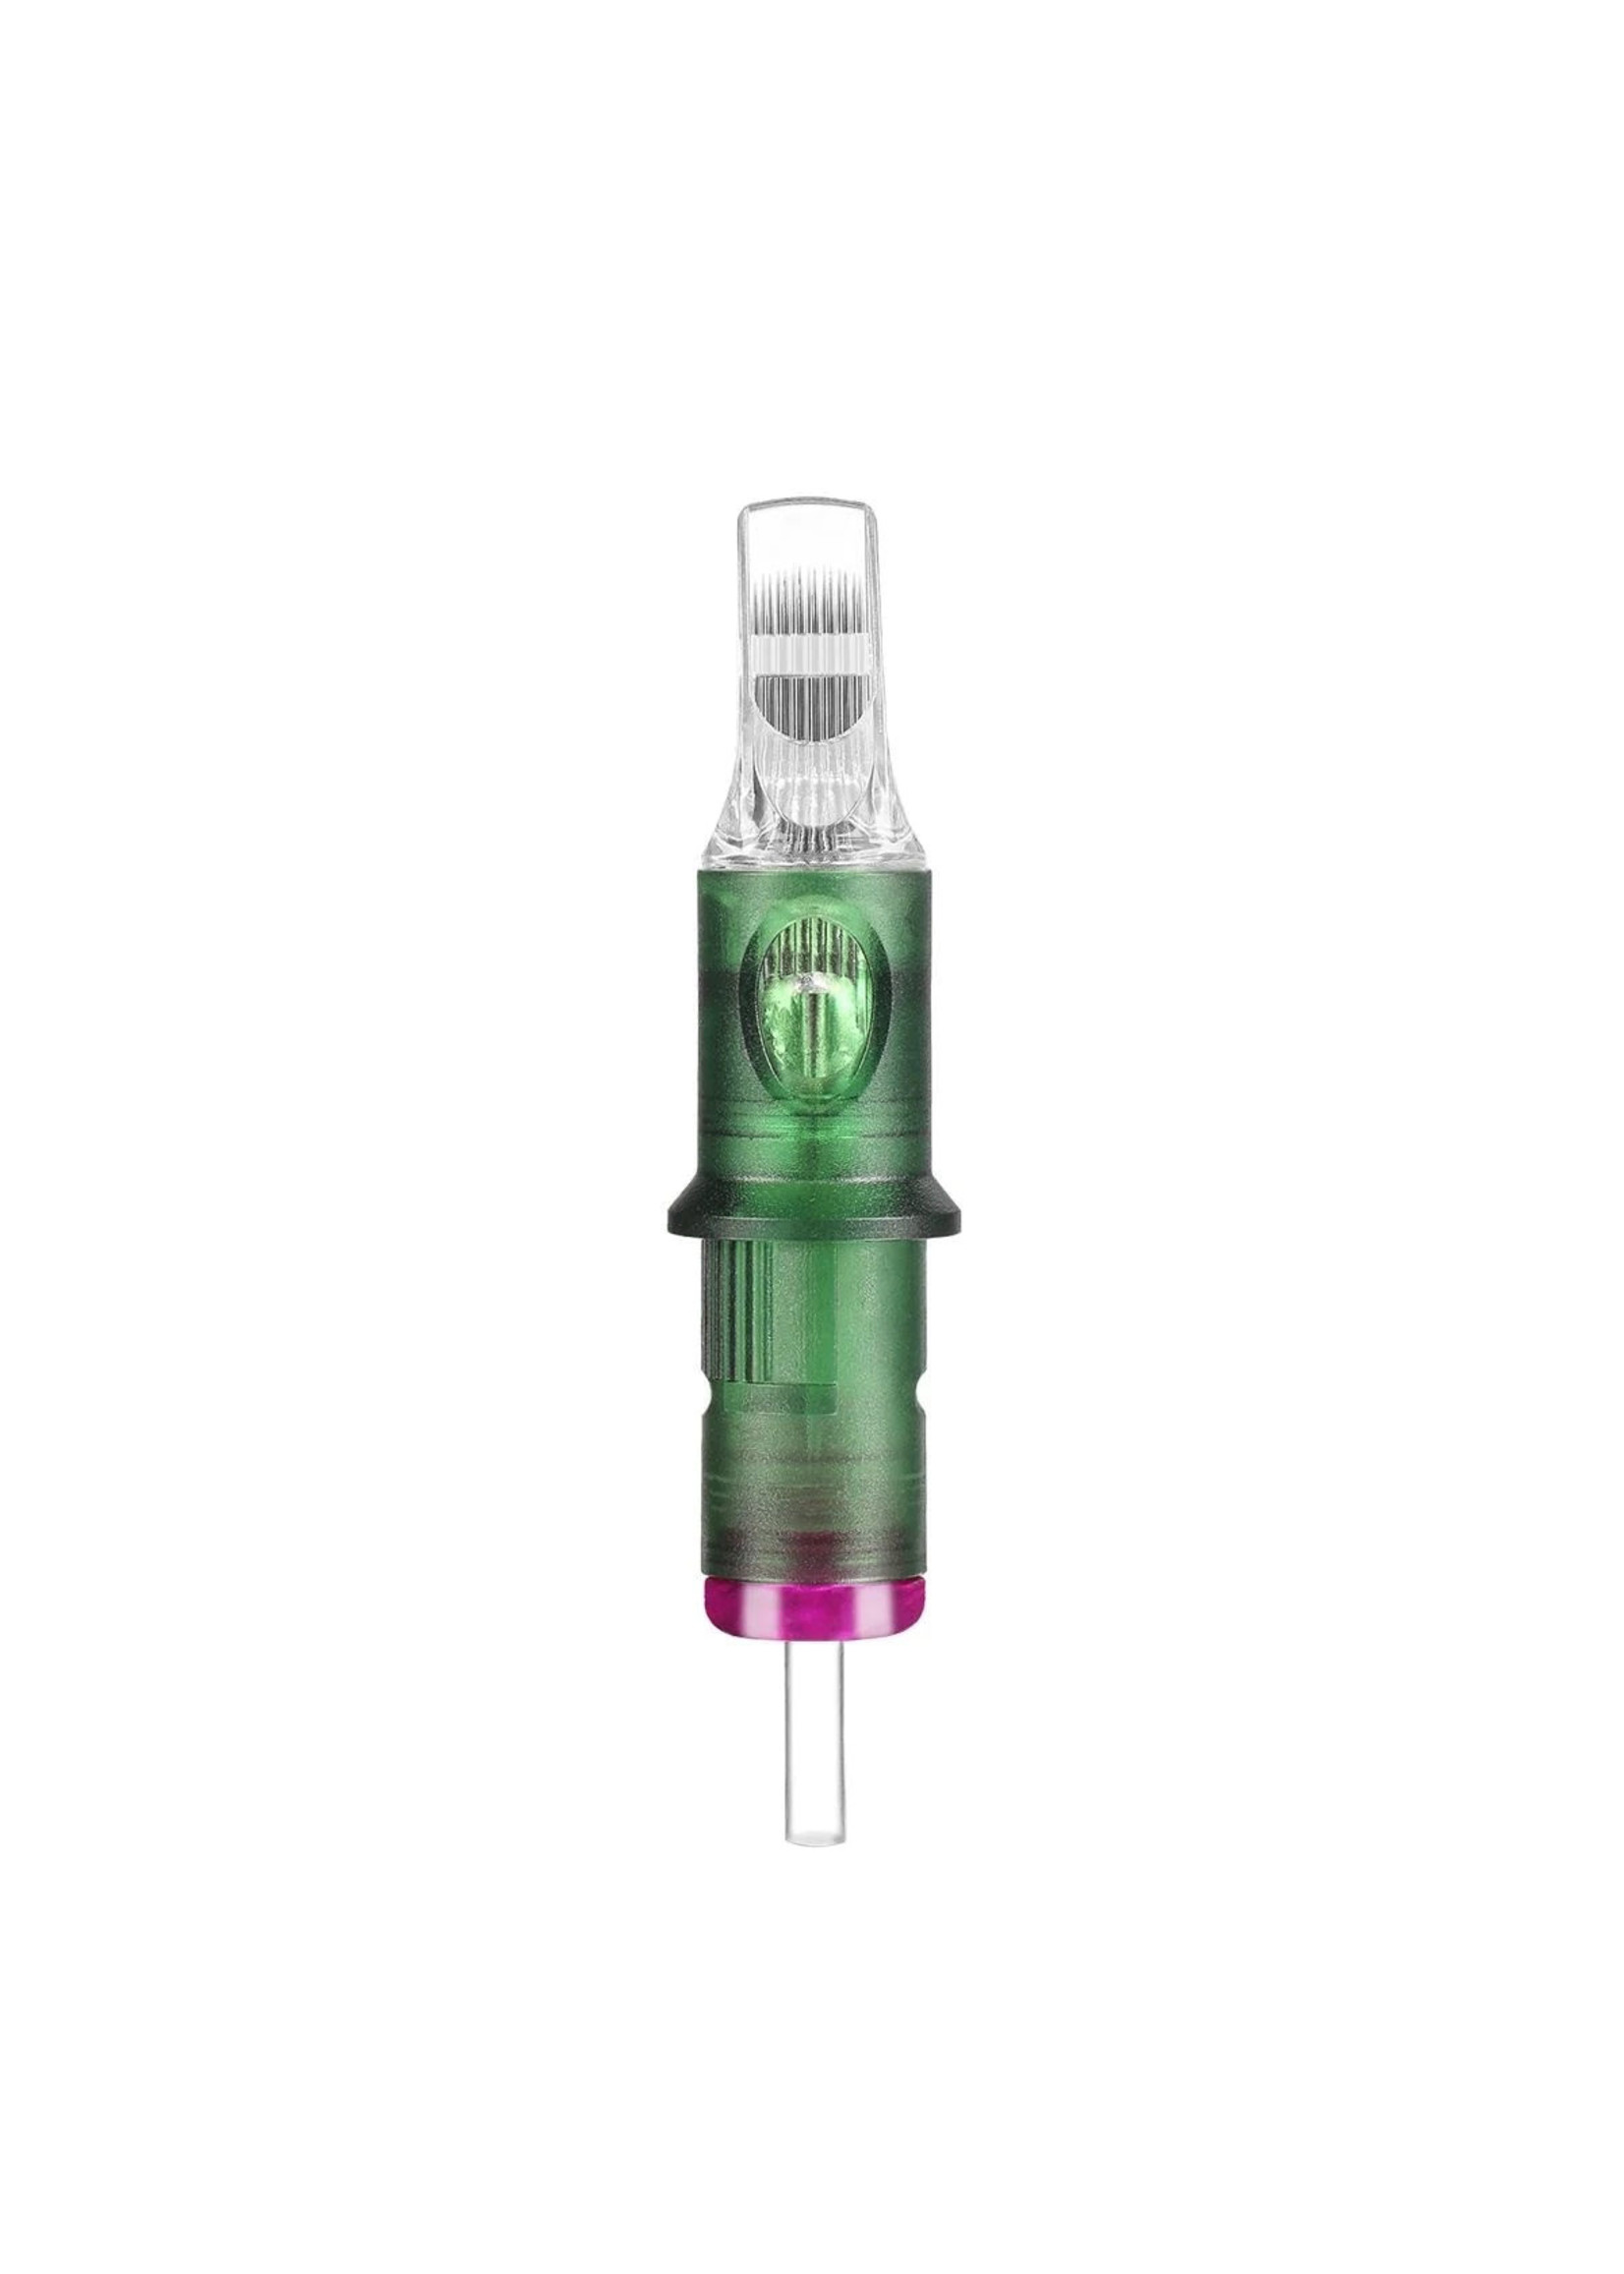 Artistic Tattoo Supply Inc. Artistic Tattoo Supply - ATS Green - Needle Cartridge - DC1015BPCM - Closed - Extra Long Taper - Great for Black and Grey work - 0.30mm - Curved Magnum - Bugpin - Box of 20pcs